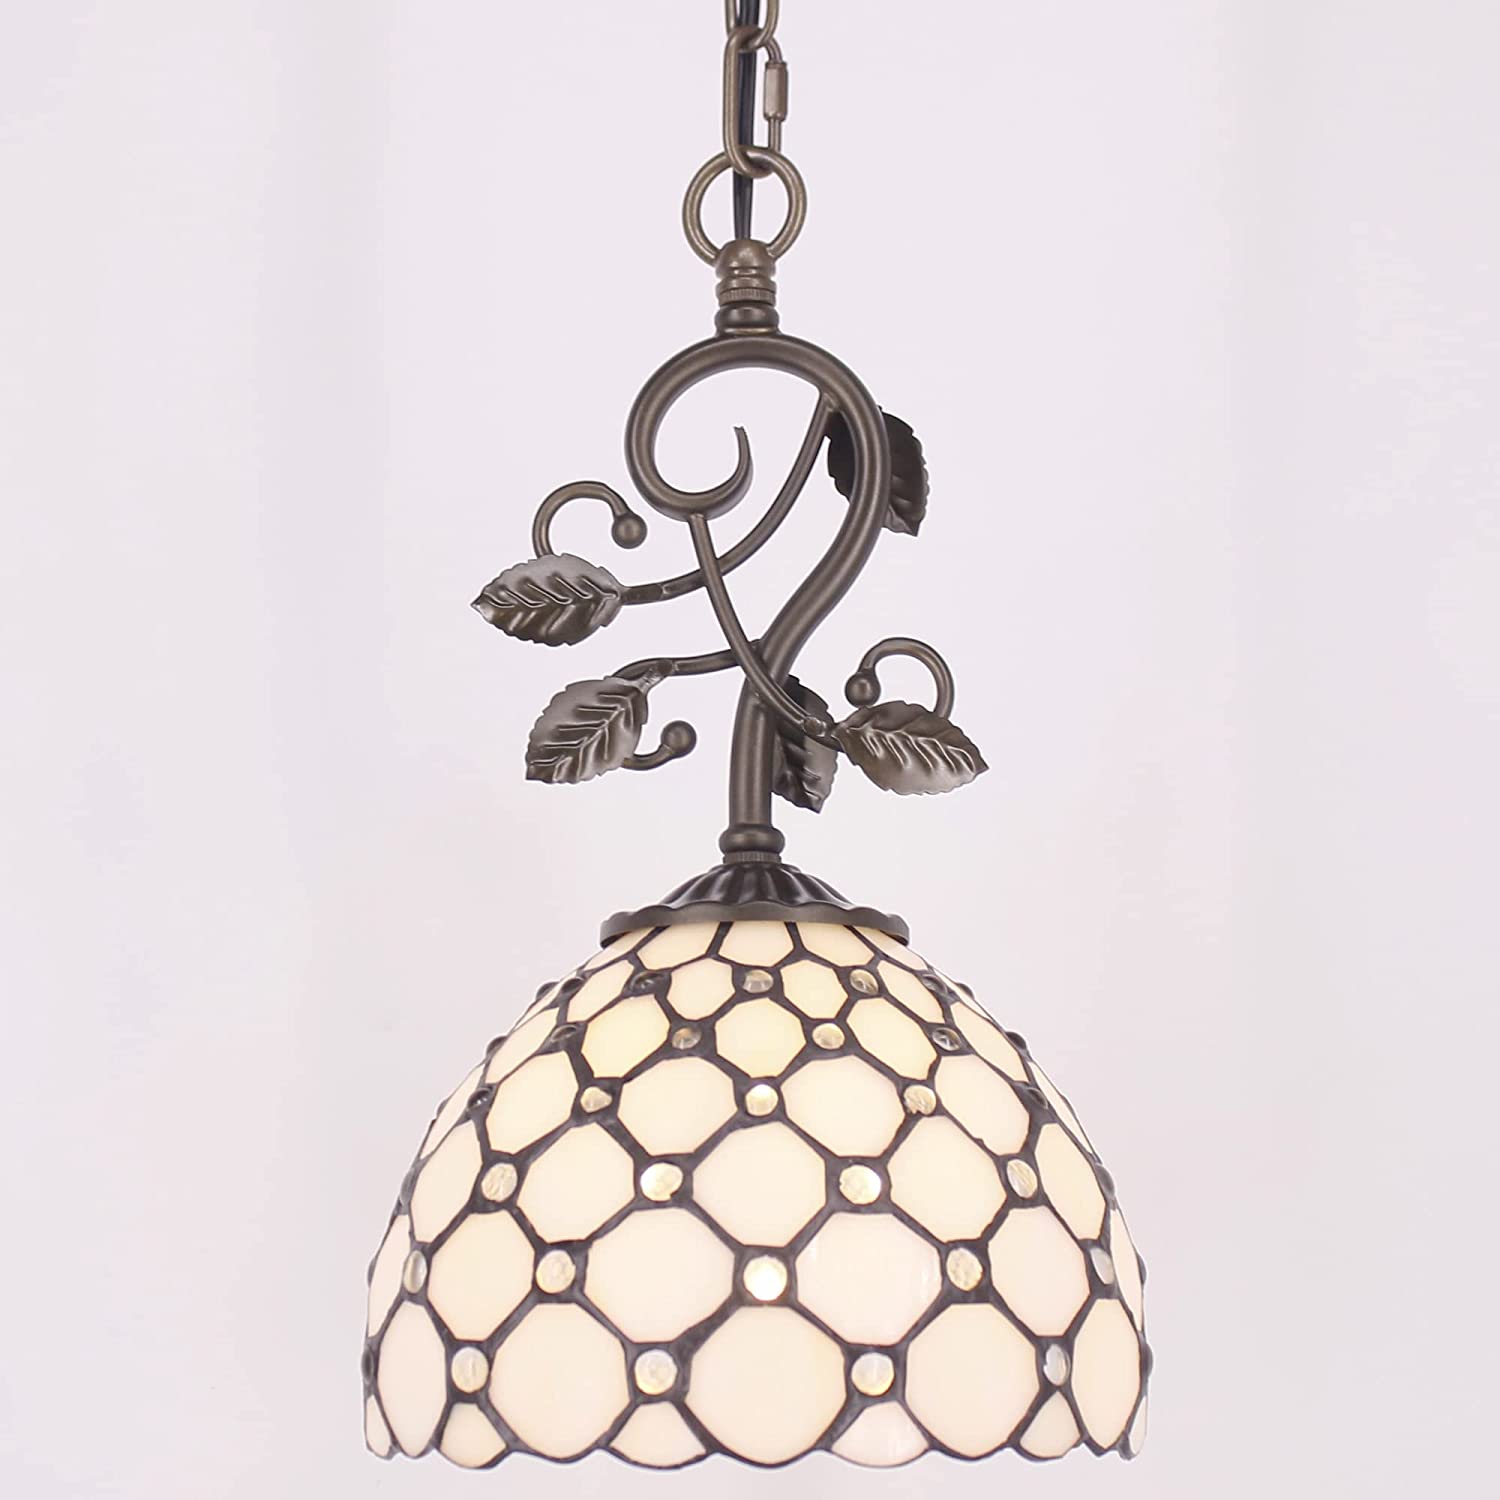 Werfactory®Tiffany Pendant Light with 8" Crystal Beads White Stained Glass Hanging Lamp